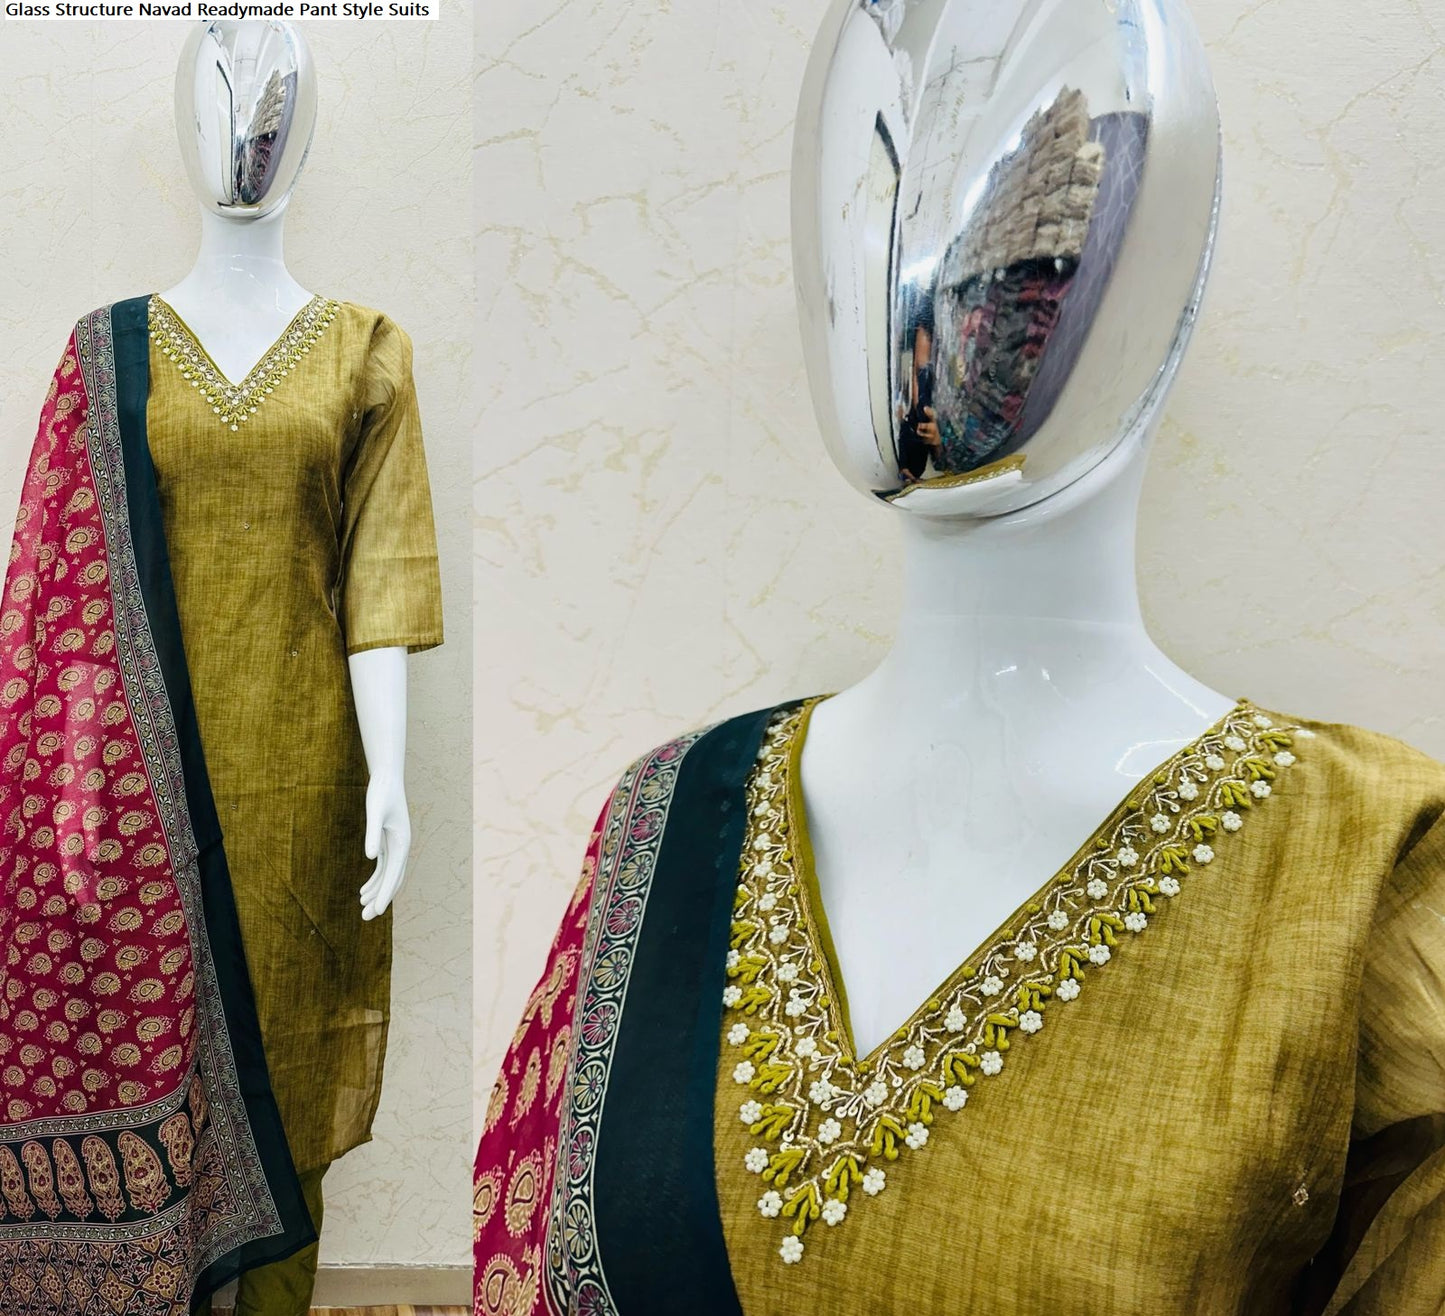 Glass Structure Navad Silk Readymade Pant Style Suits